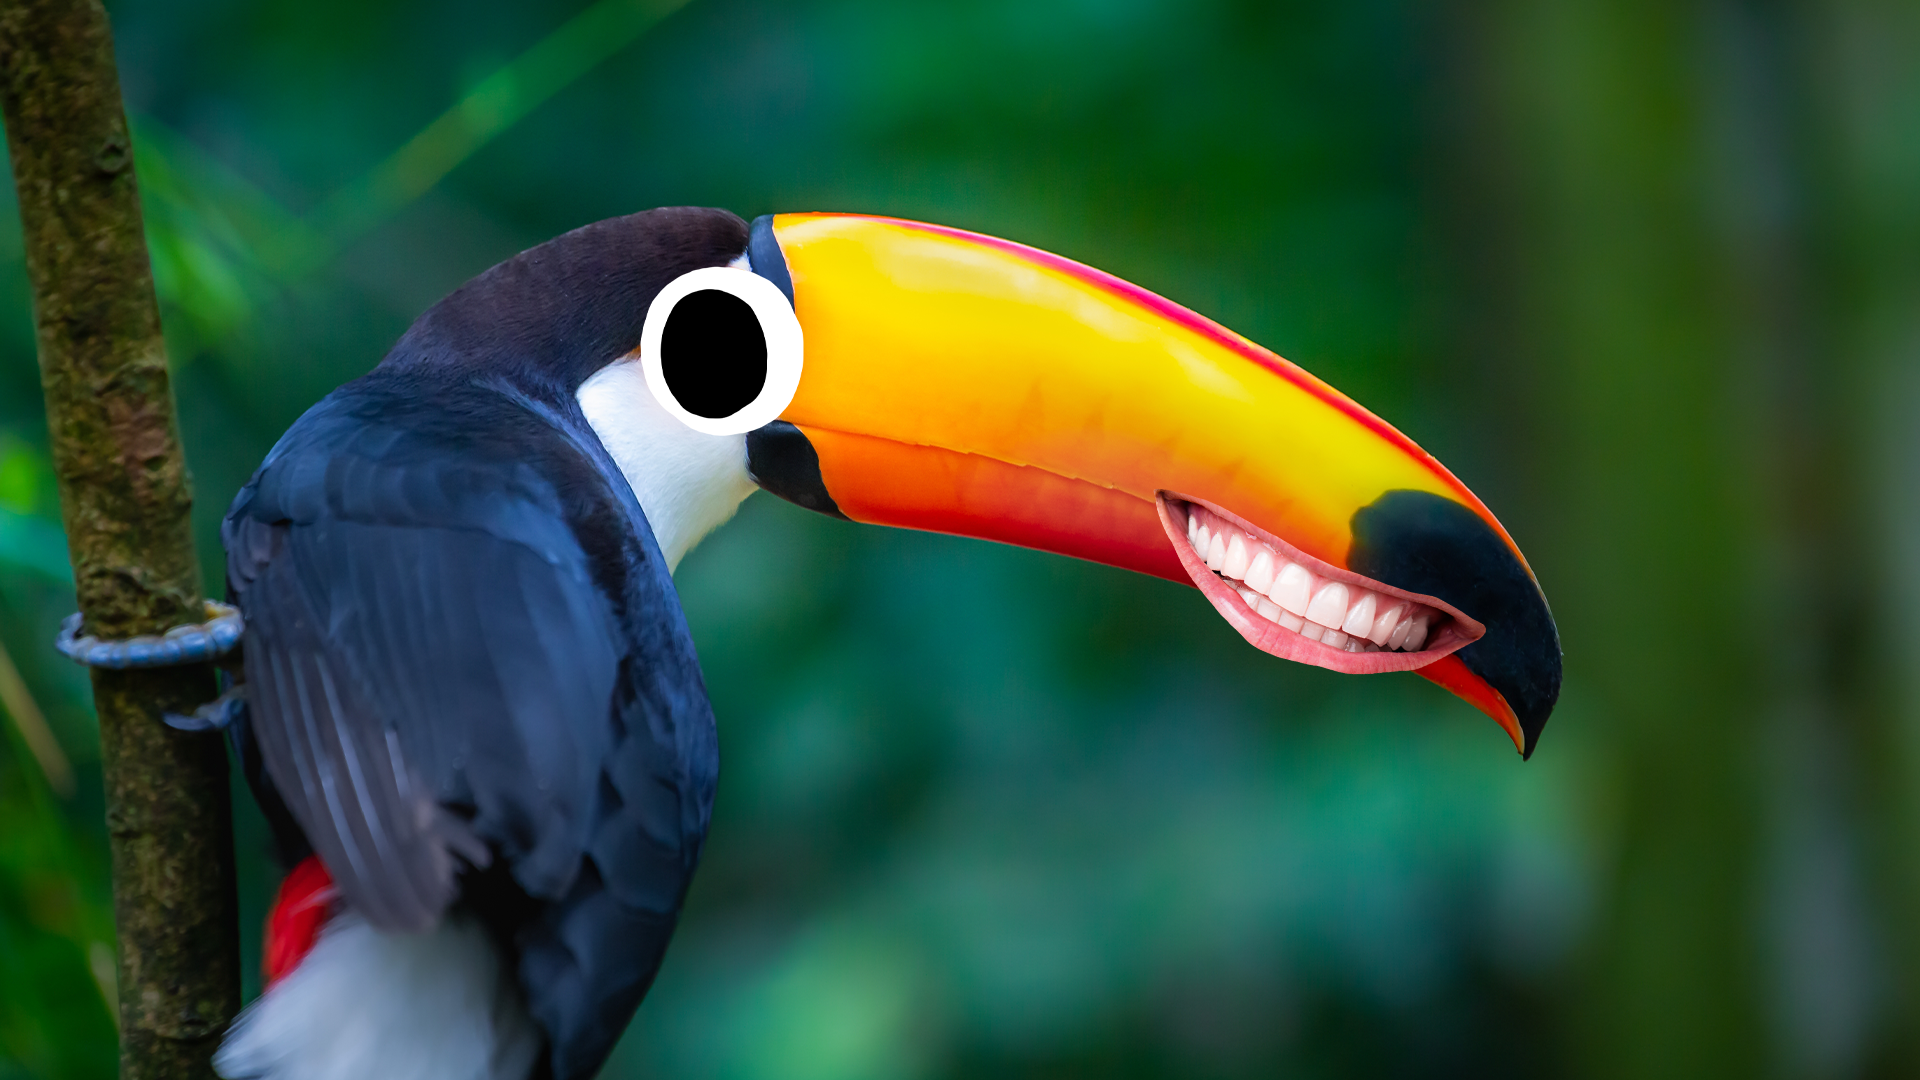 A grinning toucan